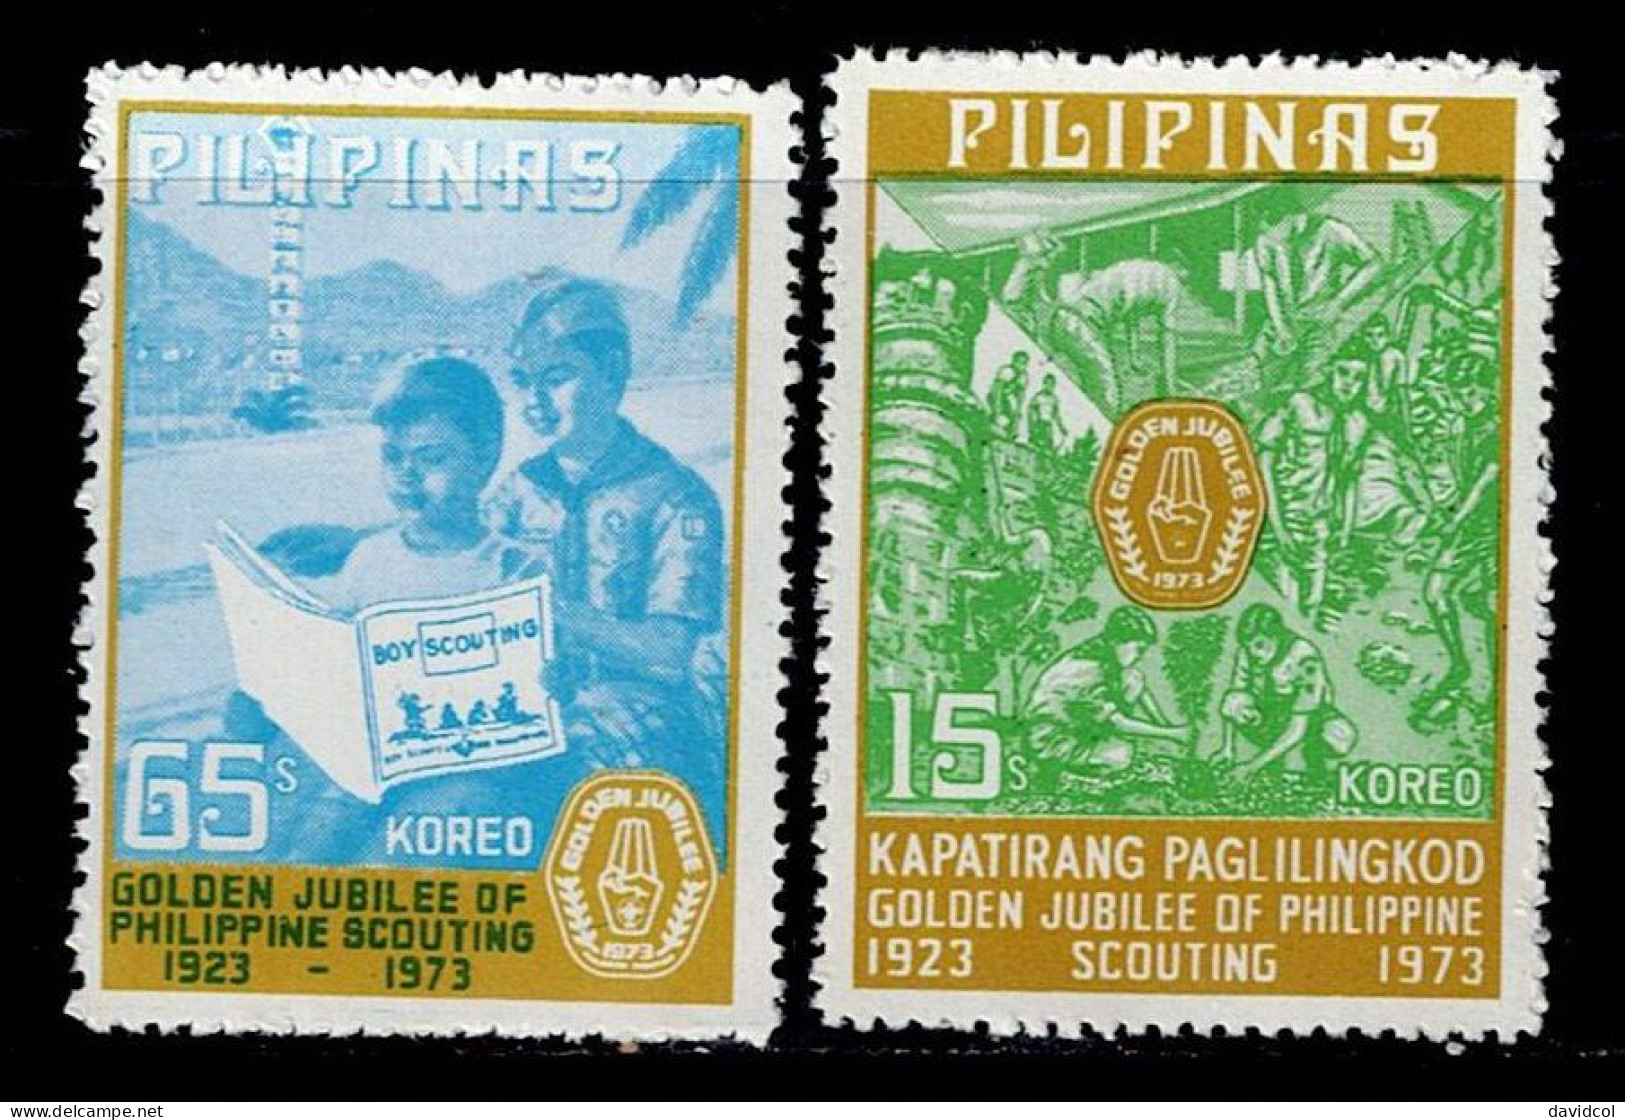 FIL-04- PHILIPPINES - 1973 - MNH -SCOUTS- GOLDEN JUBILEE OF PHILIPPINE SCOUTING - Philippinen